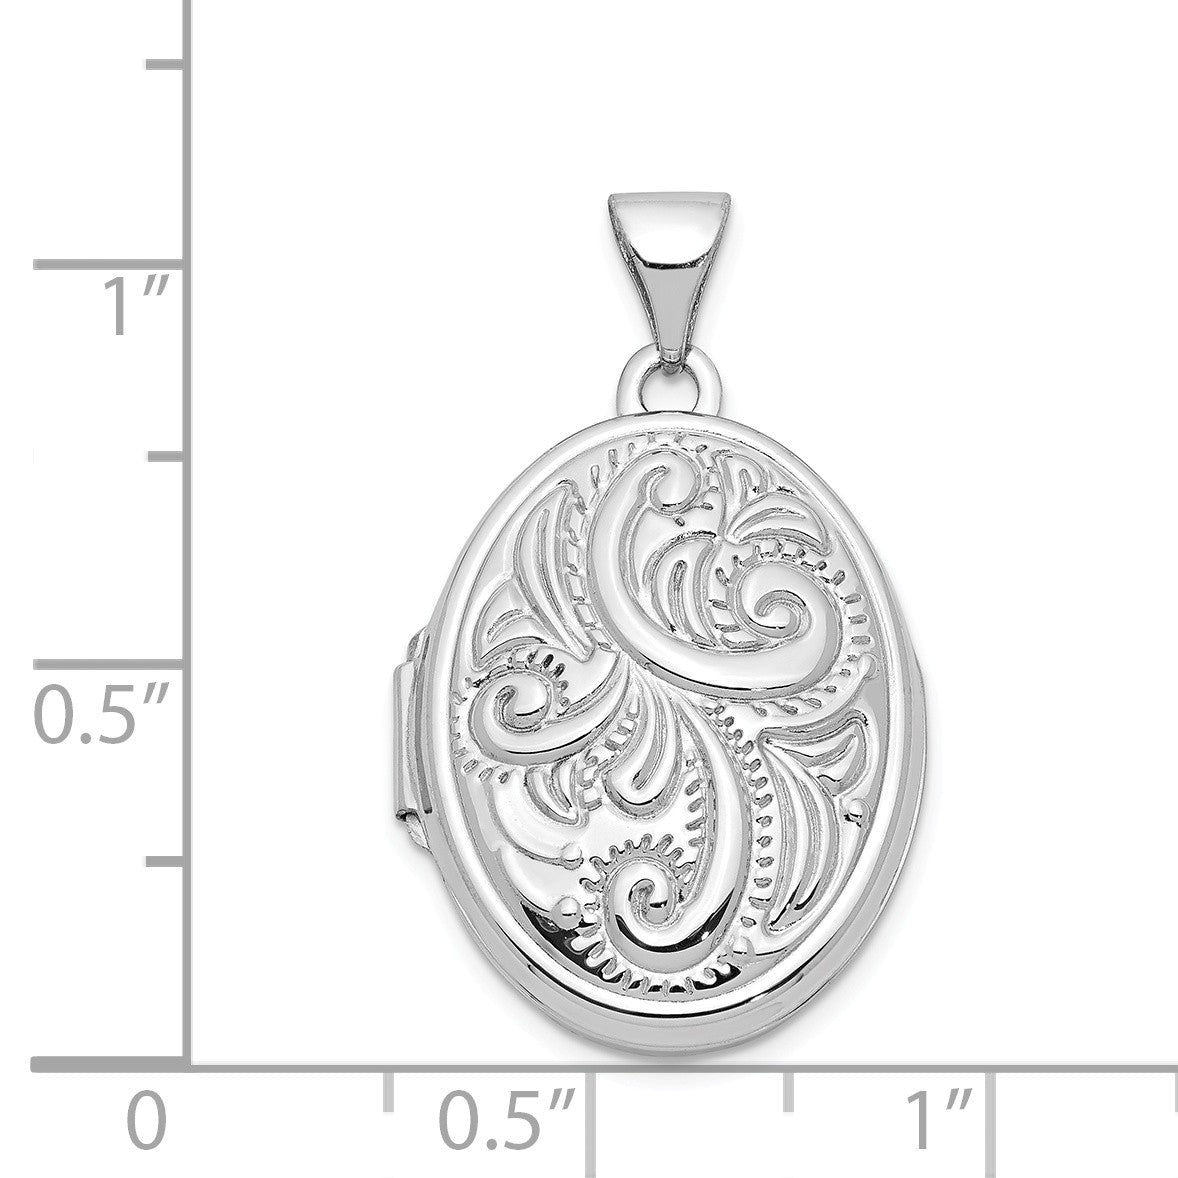 Alternate view of the 14k White Gold 21mm Domed Scroll Oval Locket by The Black Bow Jewelry Co.